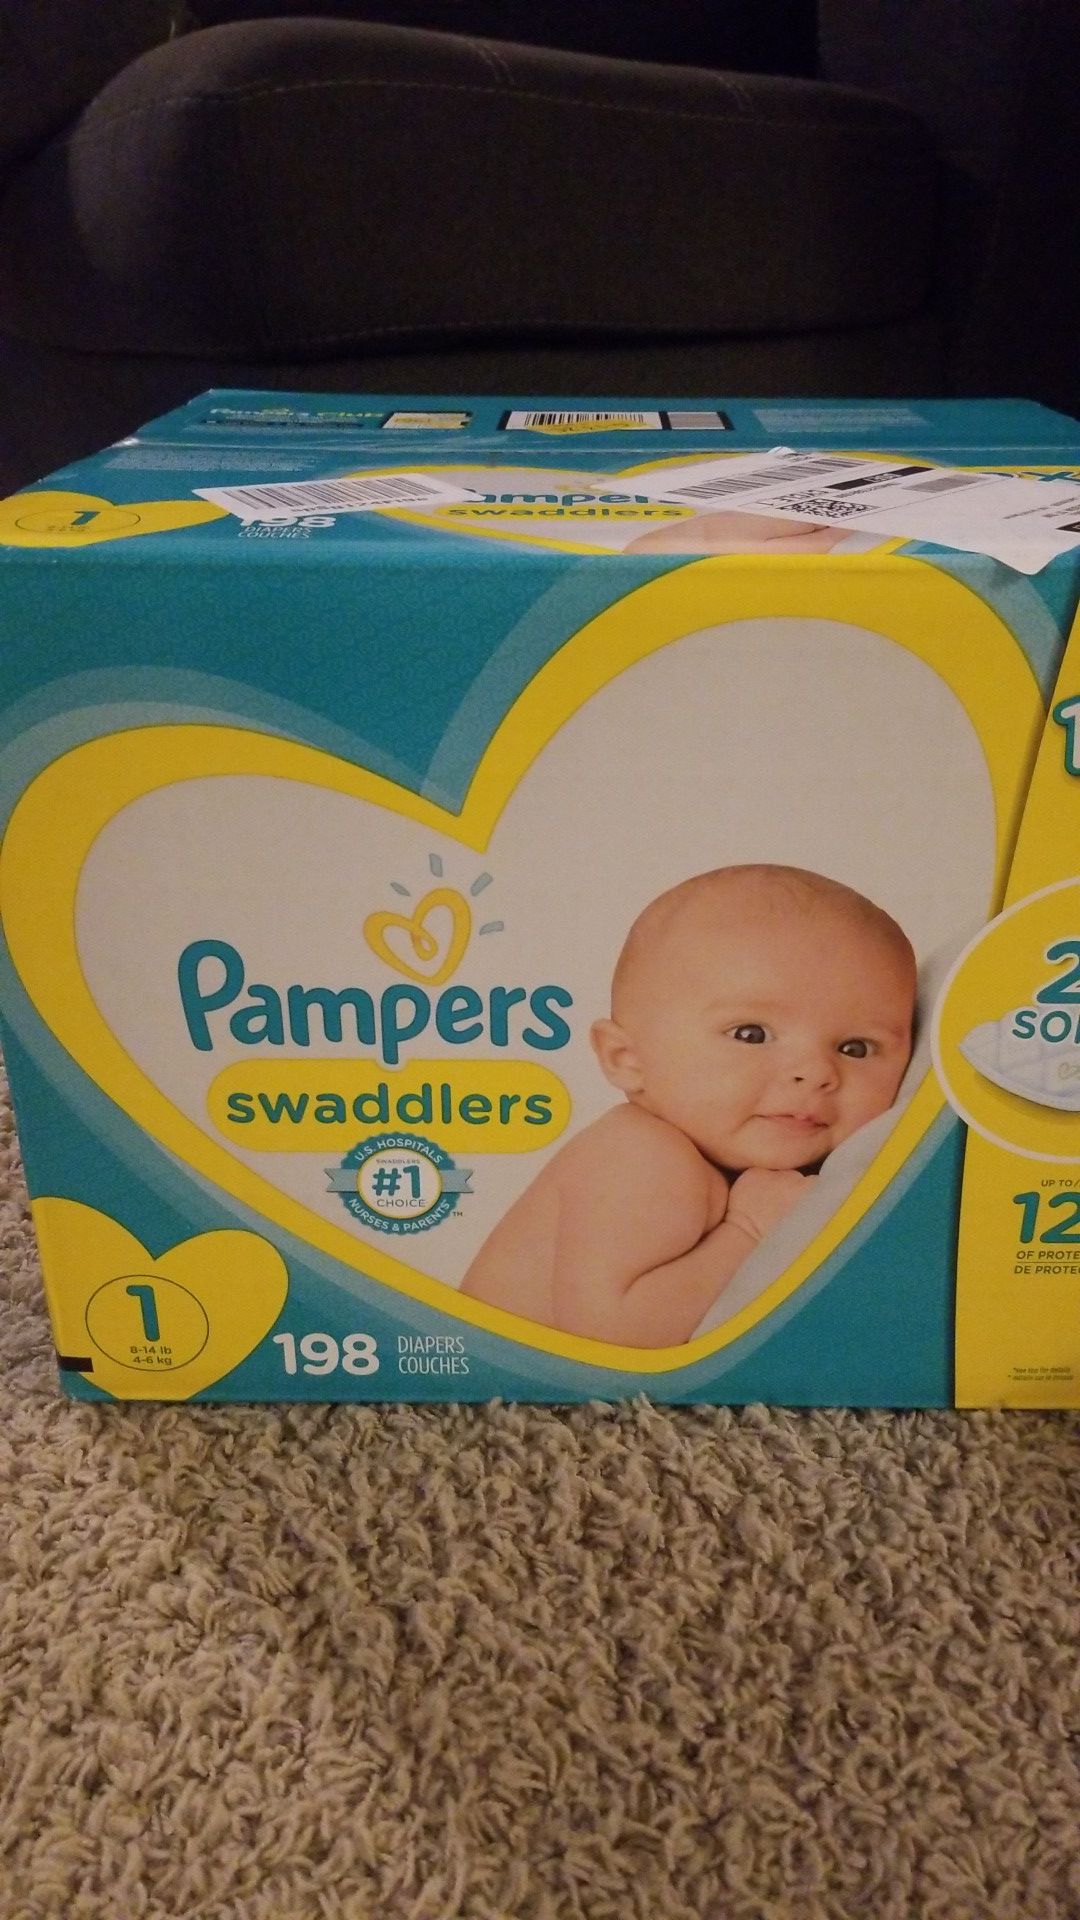 Pampers swaddled 198 count size 1